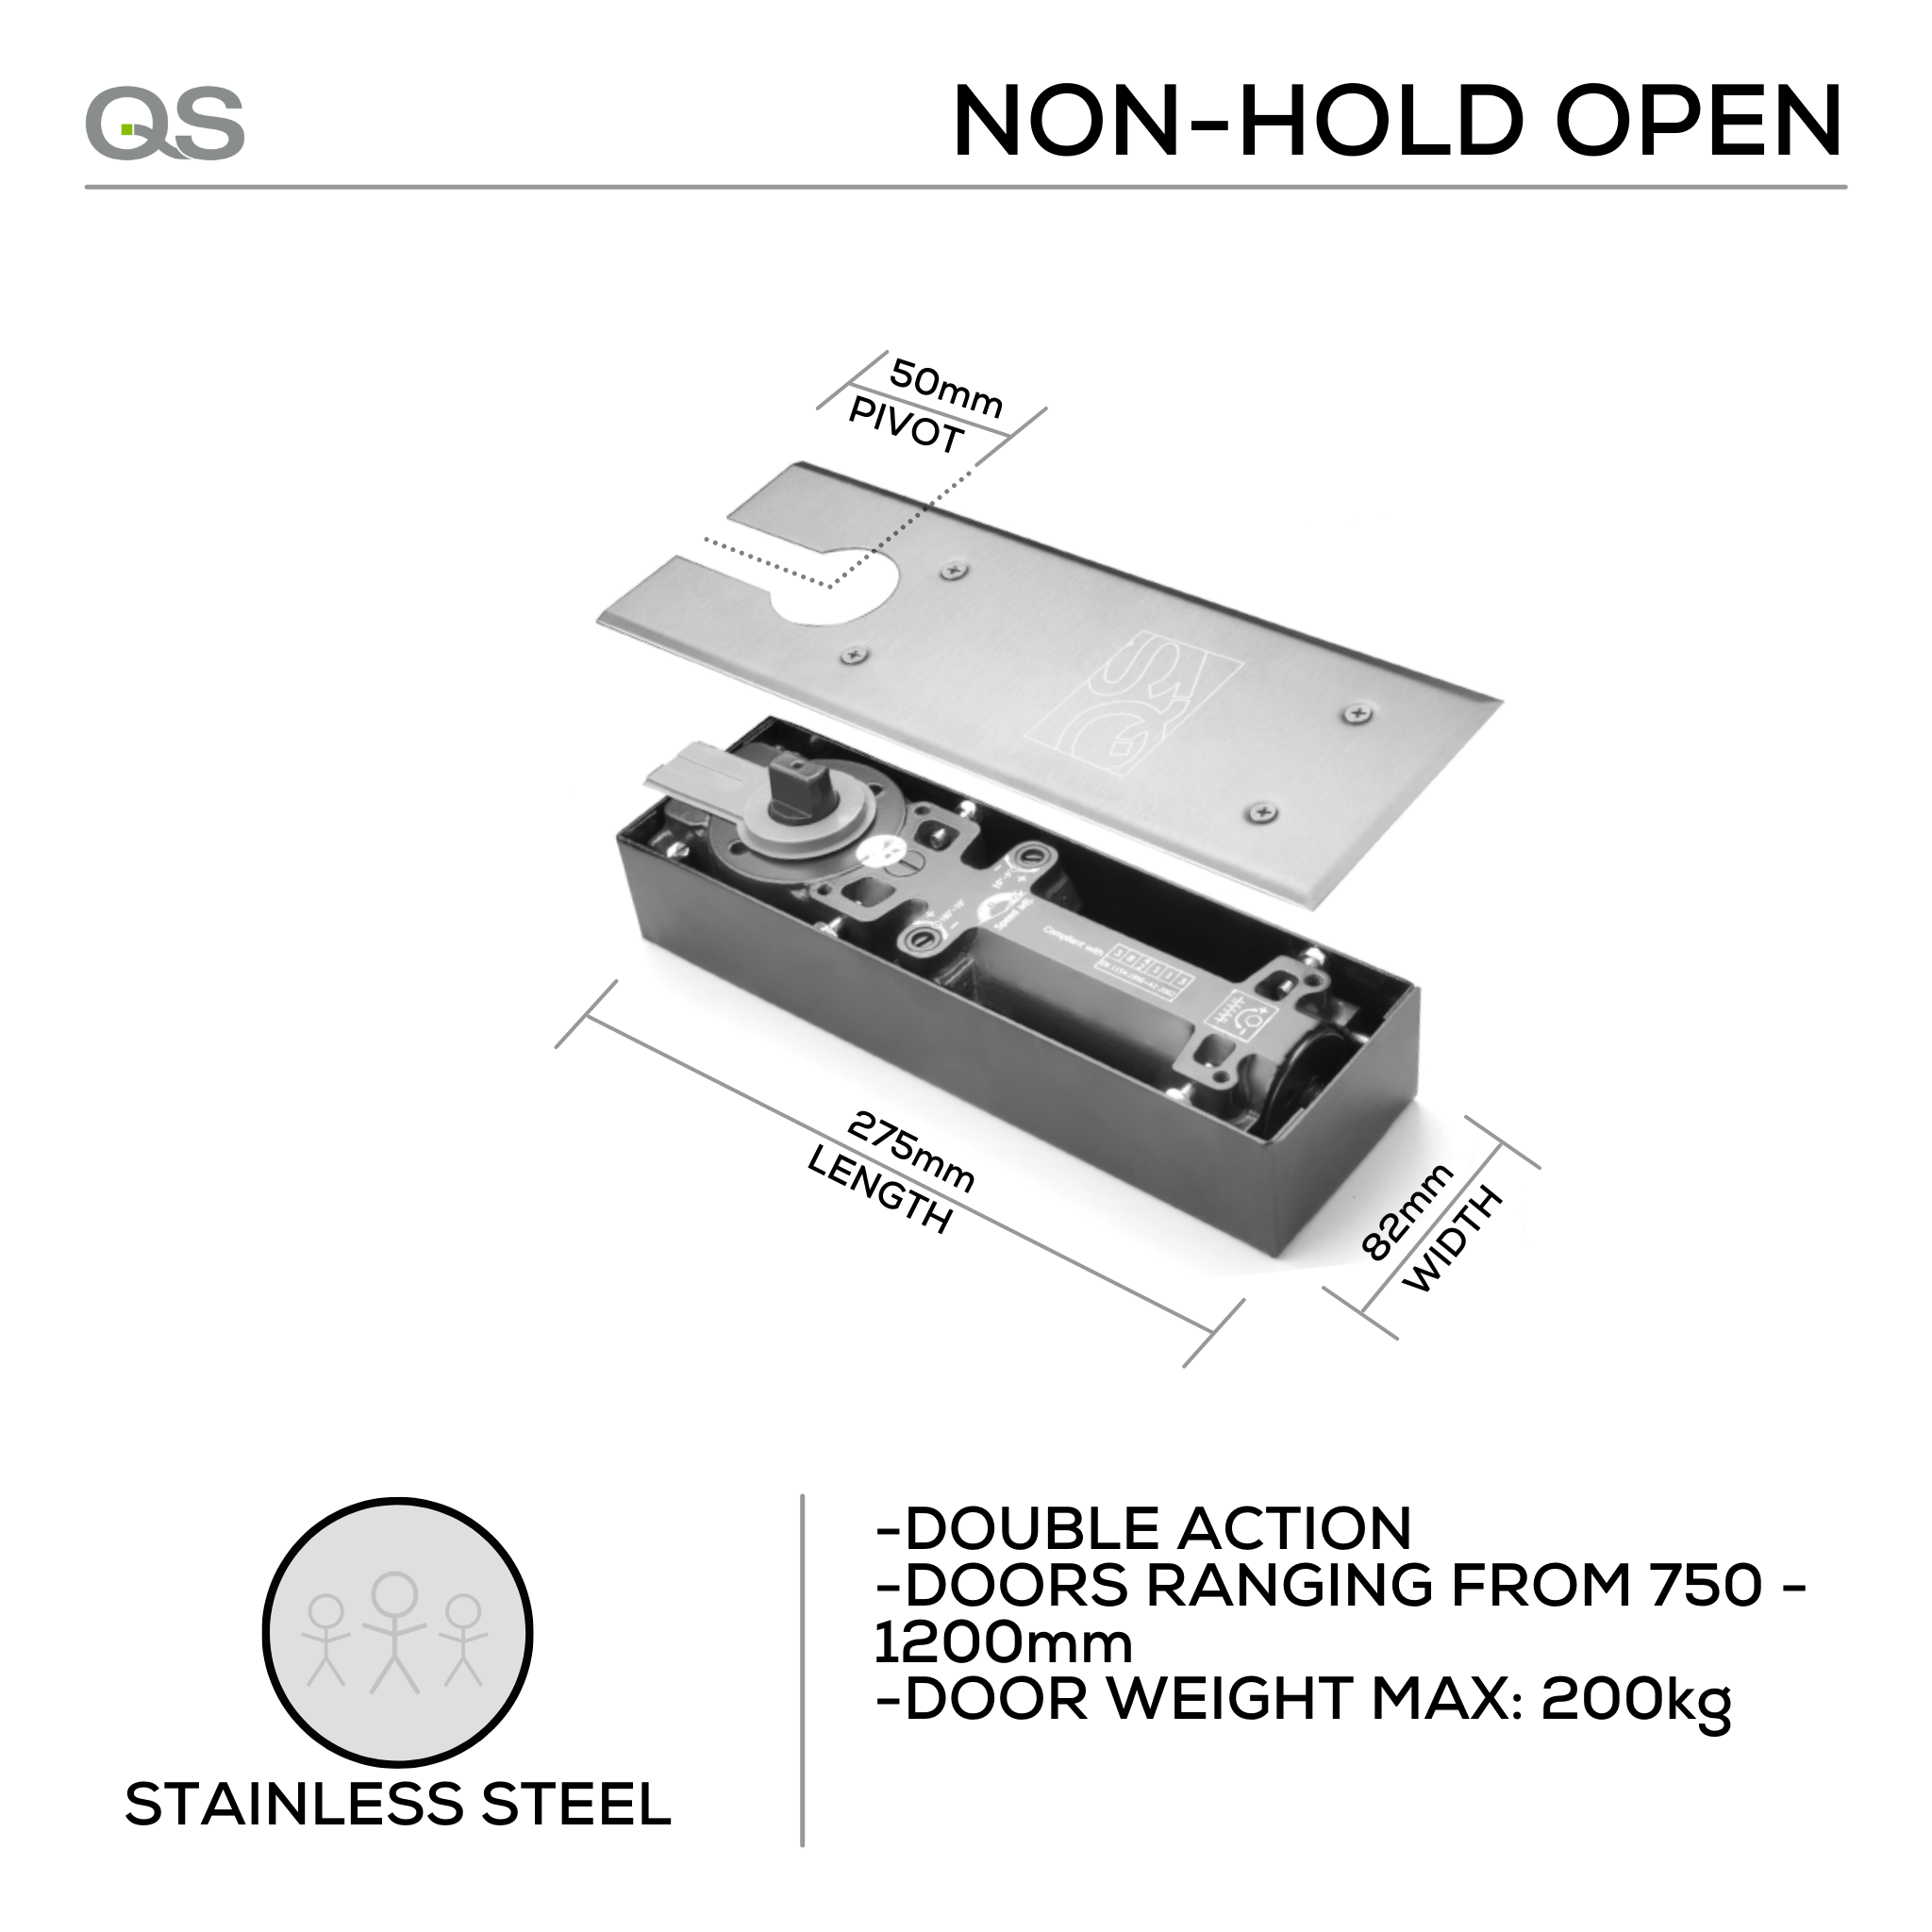 QS899V NHO, Floorspring, Double Action, Non-Hold Open, 200mm (kg), 1/2/3/4, Top Centre, Bottom Strap, Stainless Steel, QS